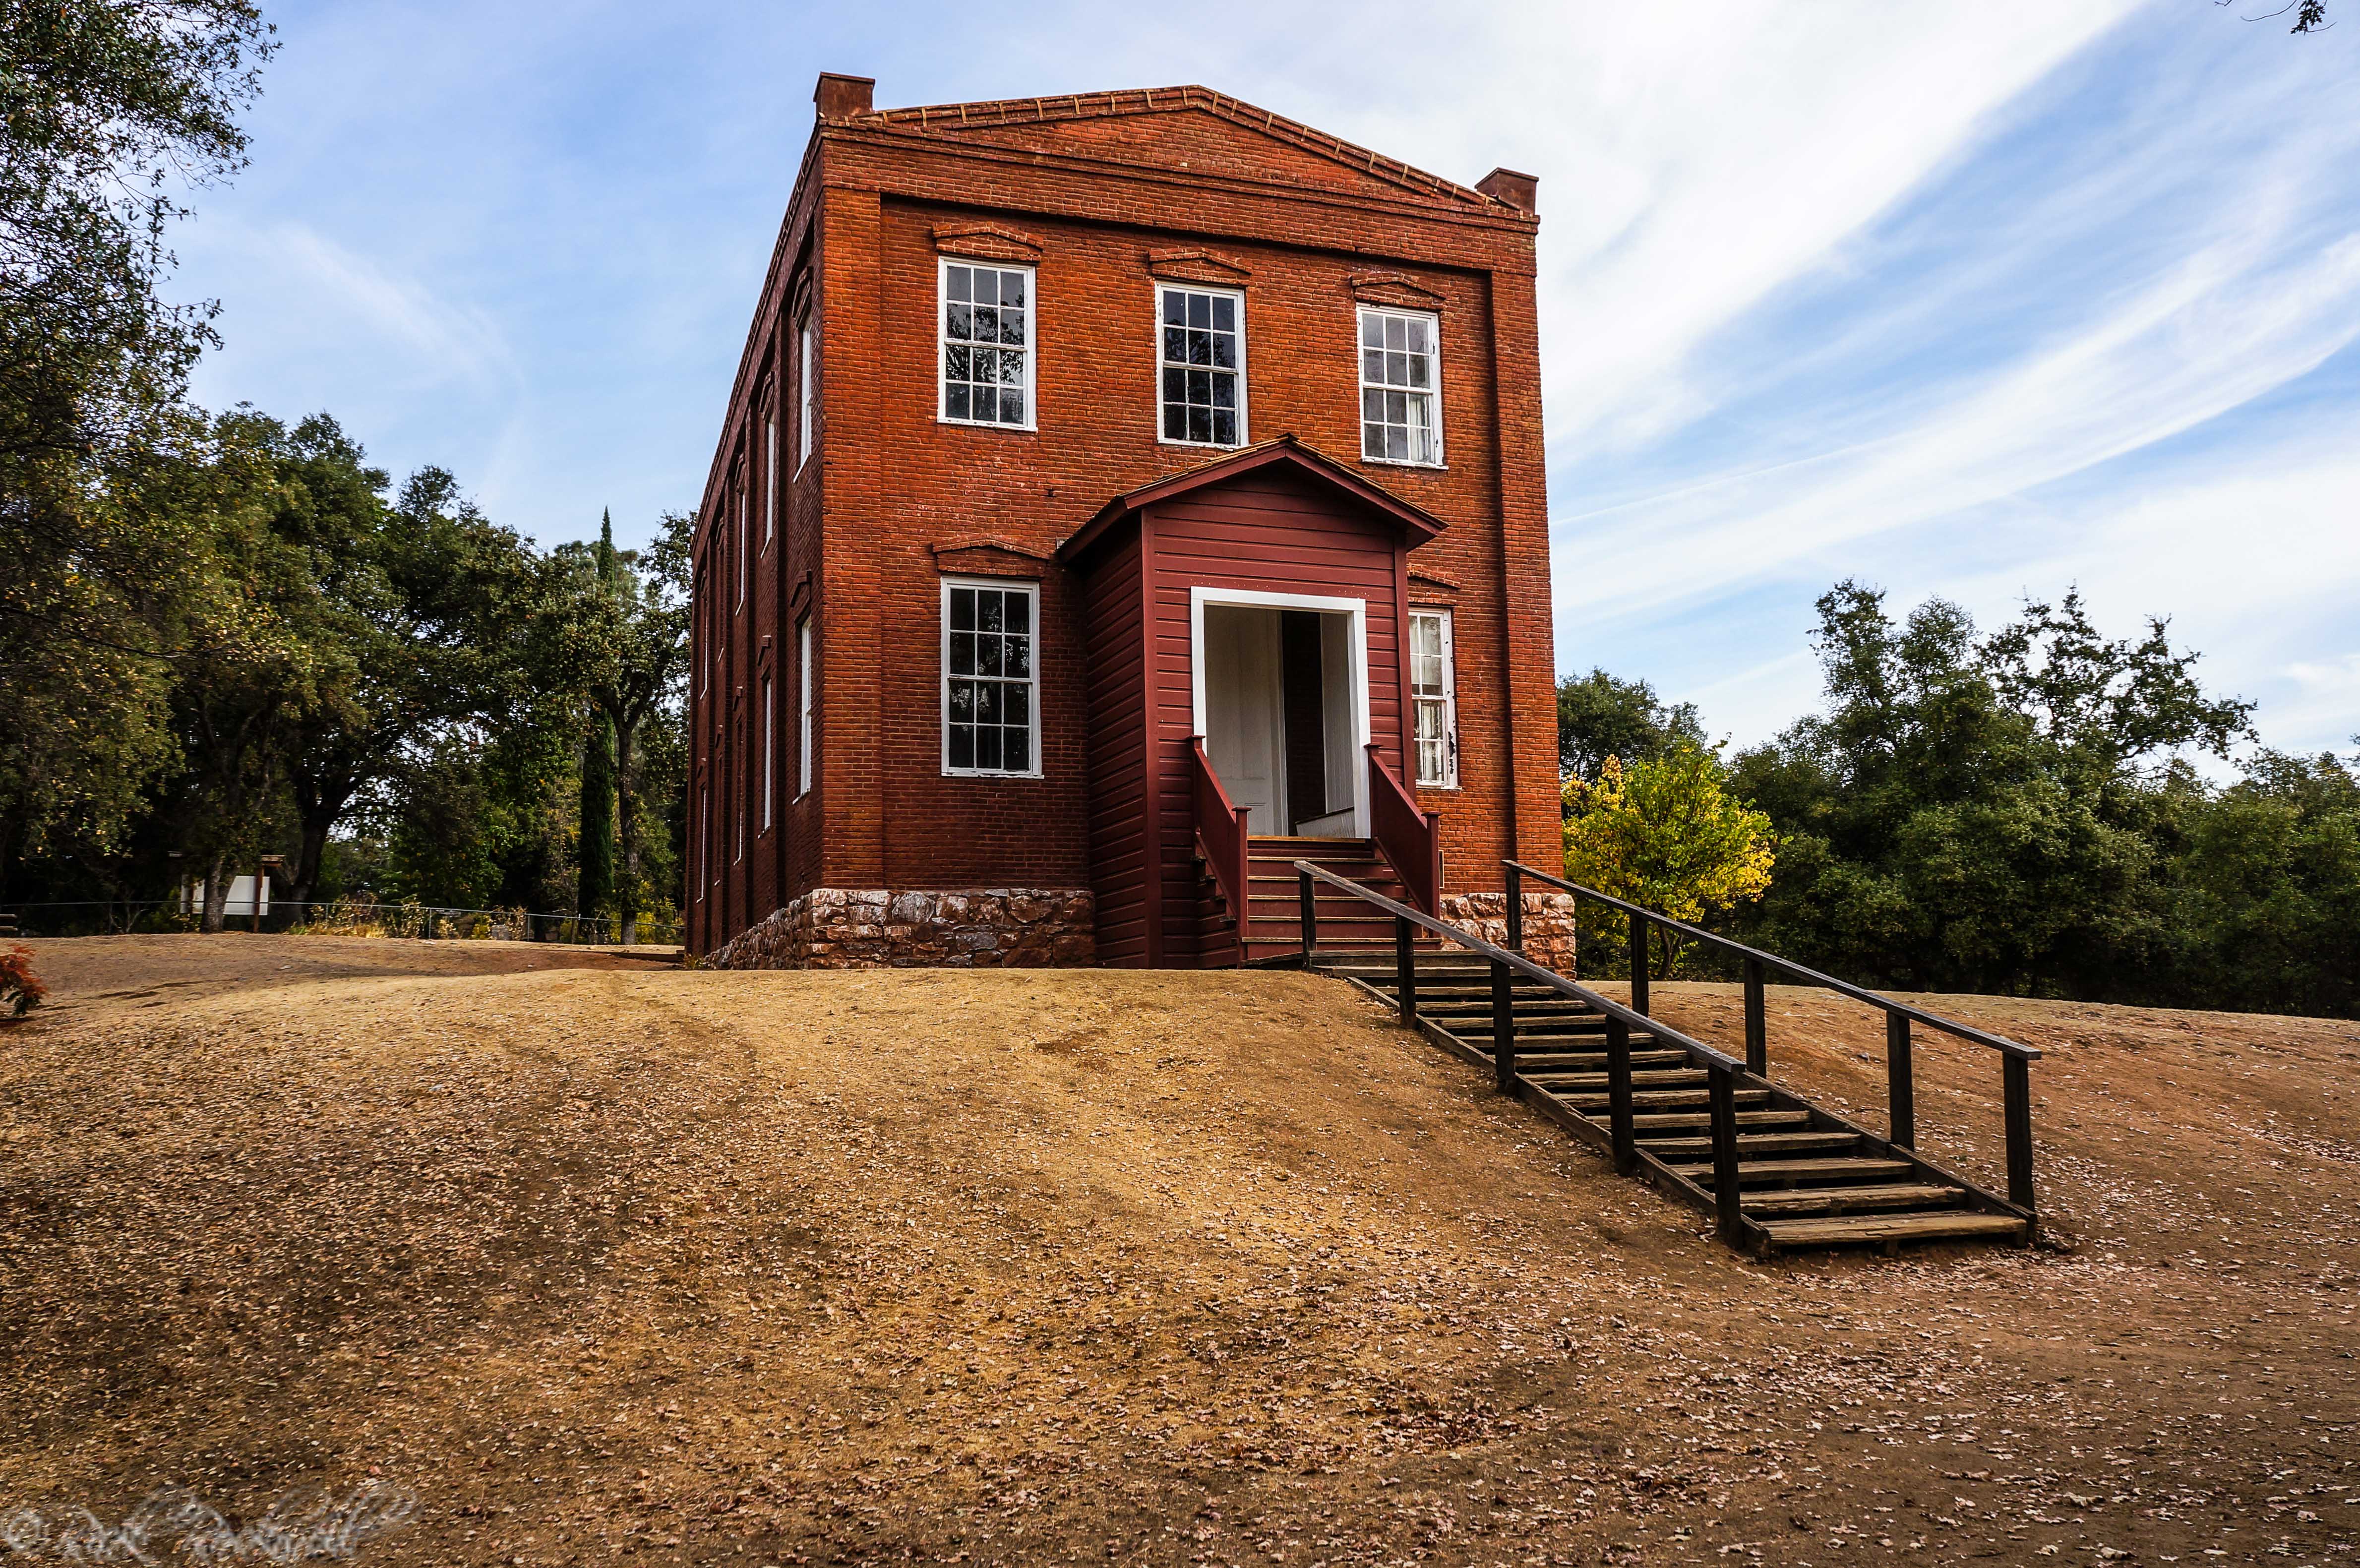 Photo of Columbia School House: the old red brick school on a hill